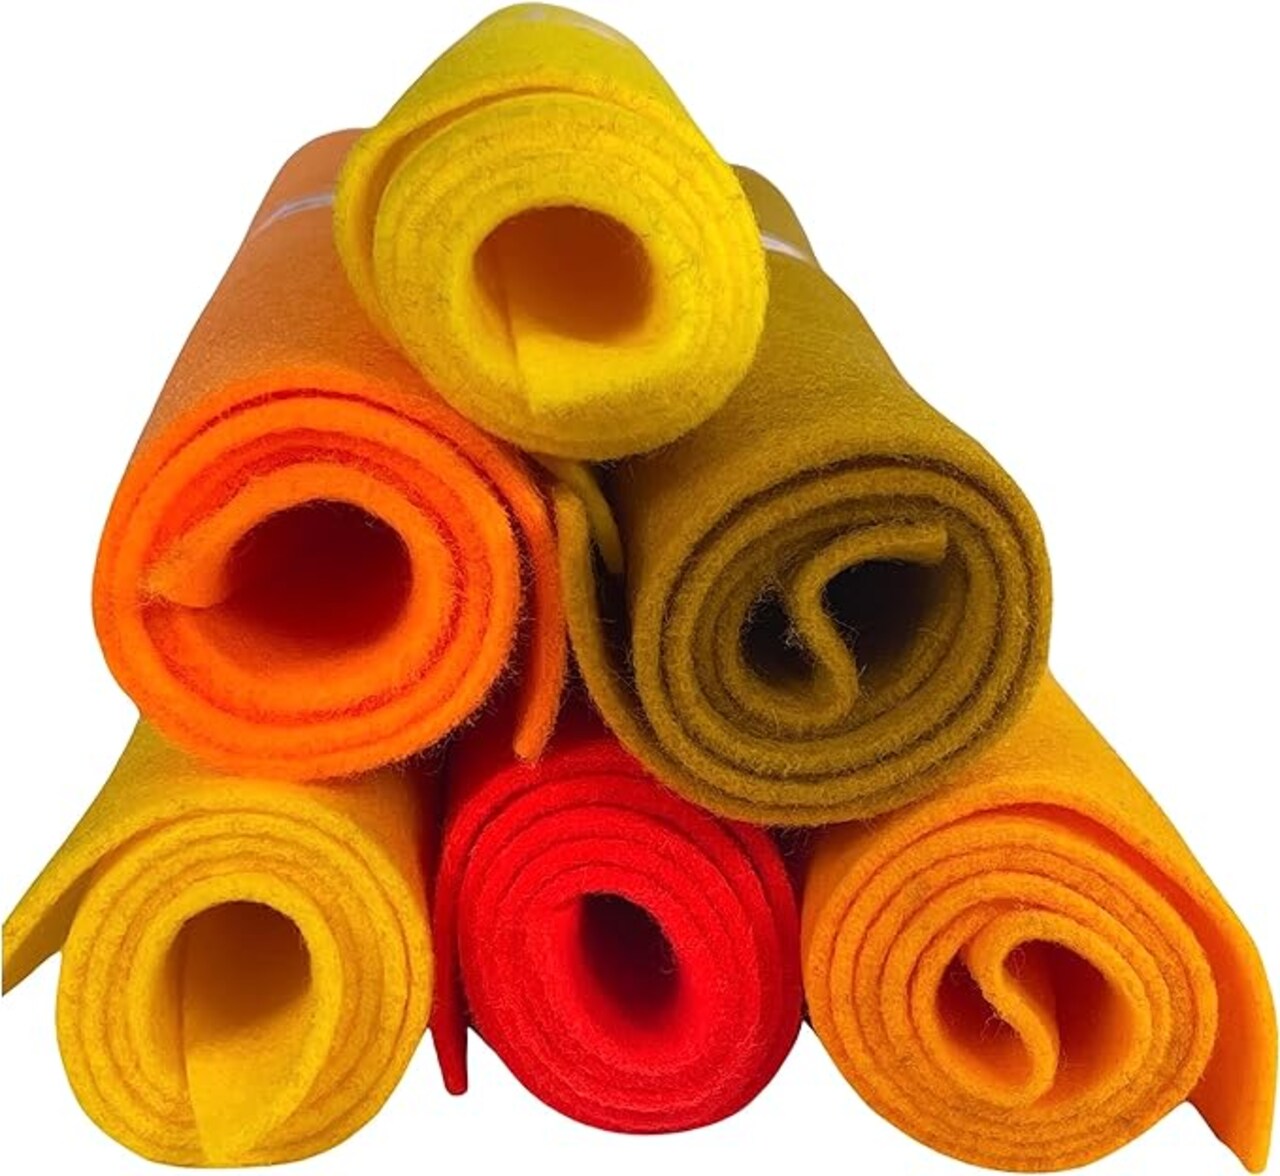 FabricLA Craft Felt Rolls 6 Pieces - 12 X 18 Inches Assorted Color  Non-Woven Soft Felt Material - Acrylic Felt Roll for DIY Craftwork, Sewing  and Patchwork - Imperial Yellows